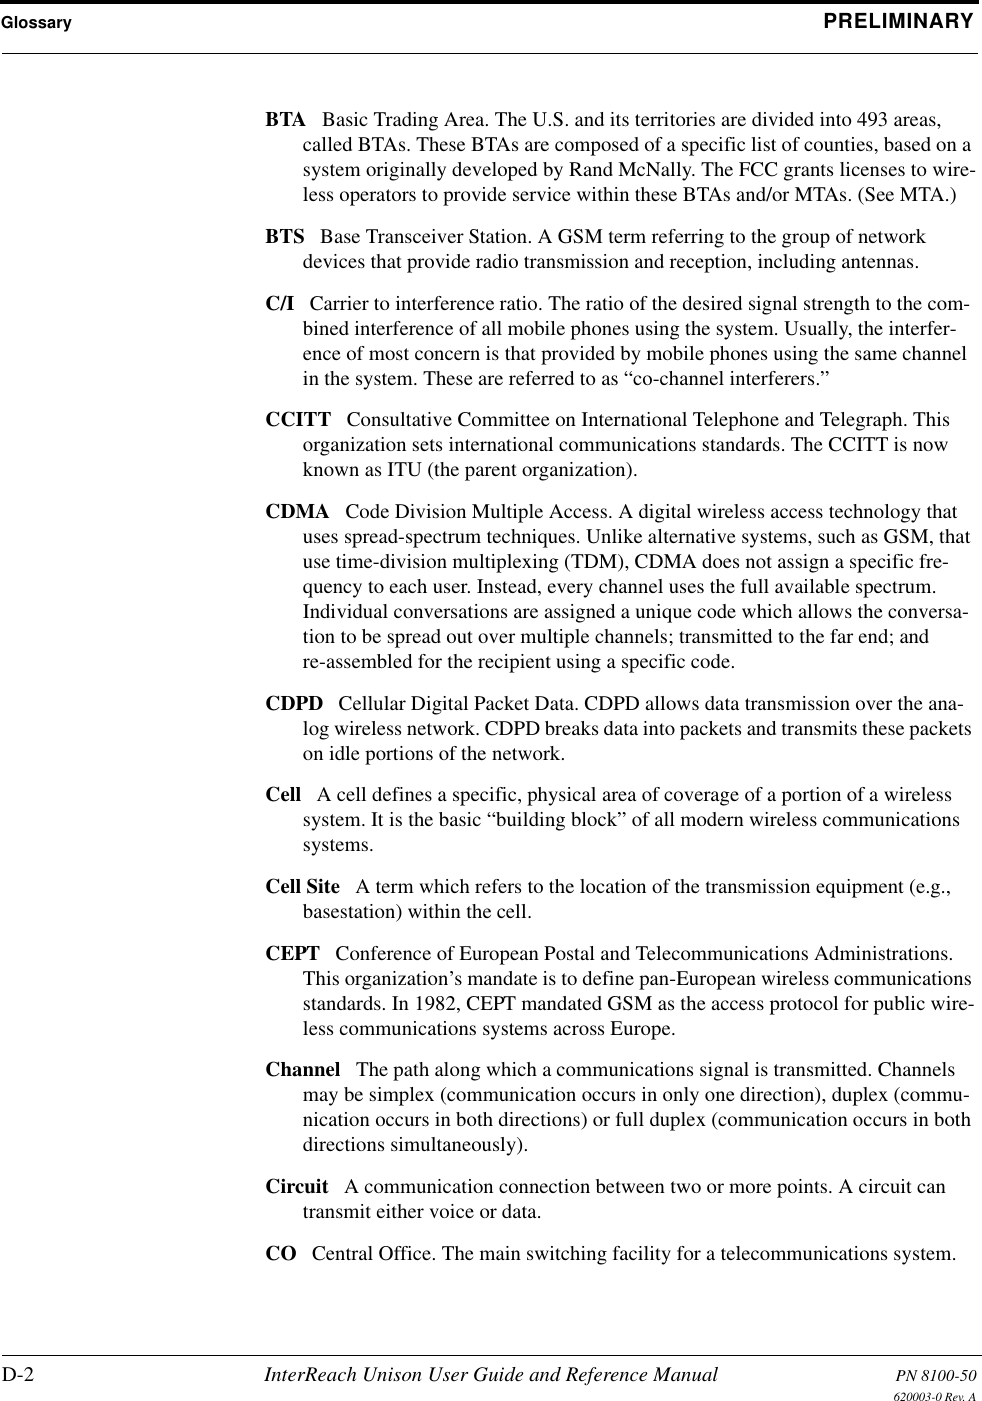 Glossary PRELIMINARYD-2 InterReach Unison User Guide and Reference Manual PN 8100-50620003-0 Rev. ABTA Basic Trading Area. The U.S. and its territories are divided into 493 areas, called BTAs. These BTAs are composed of a specific list of counties, based on a system originally developed by Rand McNally. The FCC grants licenses to wire-less operators to provide service within these BTAs and/or MTAs. (See MTA.) BTS Base Transceiver Station. A GSM term referring to the group of network devices that provide radio transmission and reception, including antennas. C/I Carrier to interference ratio. The ratio of the desired signal strength to the com-bined interference of all mobile phones using the system. Usually, the interfer-ence of most concern is that provided by mobile phones using the same channel in the system. These are referred to as “co-channel interferers.” CCITT Consultative Committee on International Telephone and Telegraph. This organization sets international communications standards. The CCITT is now known as ITU (the parent organization). CDMA Code Division Multiple Access. A digital wireless access technology that uses spread-spectrum techniques. Unlike alternative systems, such as GSM, that use time-division multiplexing (TDM), CDMA does not assign a specific fre-quency to each user. Instead, every channel uses the full available spectrum. Individual conversations are assigned a unique code which allows the conversa-tion to be spread out over multiple channels; transmitted to the far end; and re-assembled for the recipient using a specific code. CDPD Cellular Digital Packet Data. CDPD allows data transmission over the ana-log wireless network. CDPD breaks data into packets and transmits these packets on idle portions of the network. Cell A cell defines a specific, physical area of coverage of a portion of a wireless system. It is the basic “building block” of all modern wireless communications systems. Cell Site A term which refers to the location of the transmission equipment (e.g., basestation) within the cell. CEPT Conference of European Postal and Telecommunications Administrations. This organization’s mandate is to define pan-European wireless communications standards. In 1982, CEPT mandated GSM as the access protocol for public wire-less communications systems across Europe. Channel The path along which a communications signal is transmitted. Channels may be simplex (communication occurs in only one direction), duplex (commu-nication occurs in both directions) or full duplex (communication occurs in both directions simultaneously). Circuit A communication connection between two or more points. A circuit can transmit either voice or data. CO Central Office. The main switching facility for a telecommunications system. 